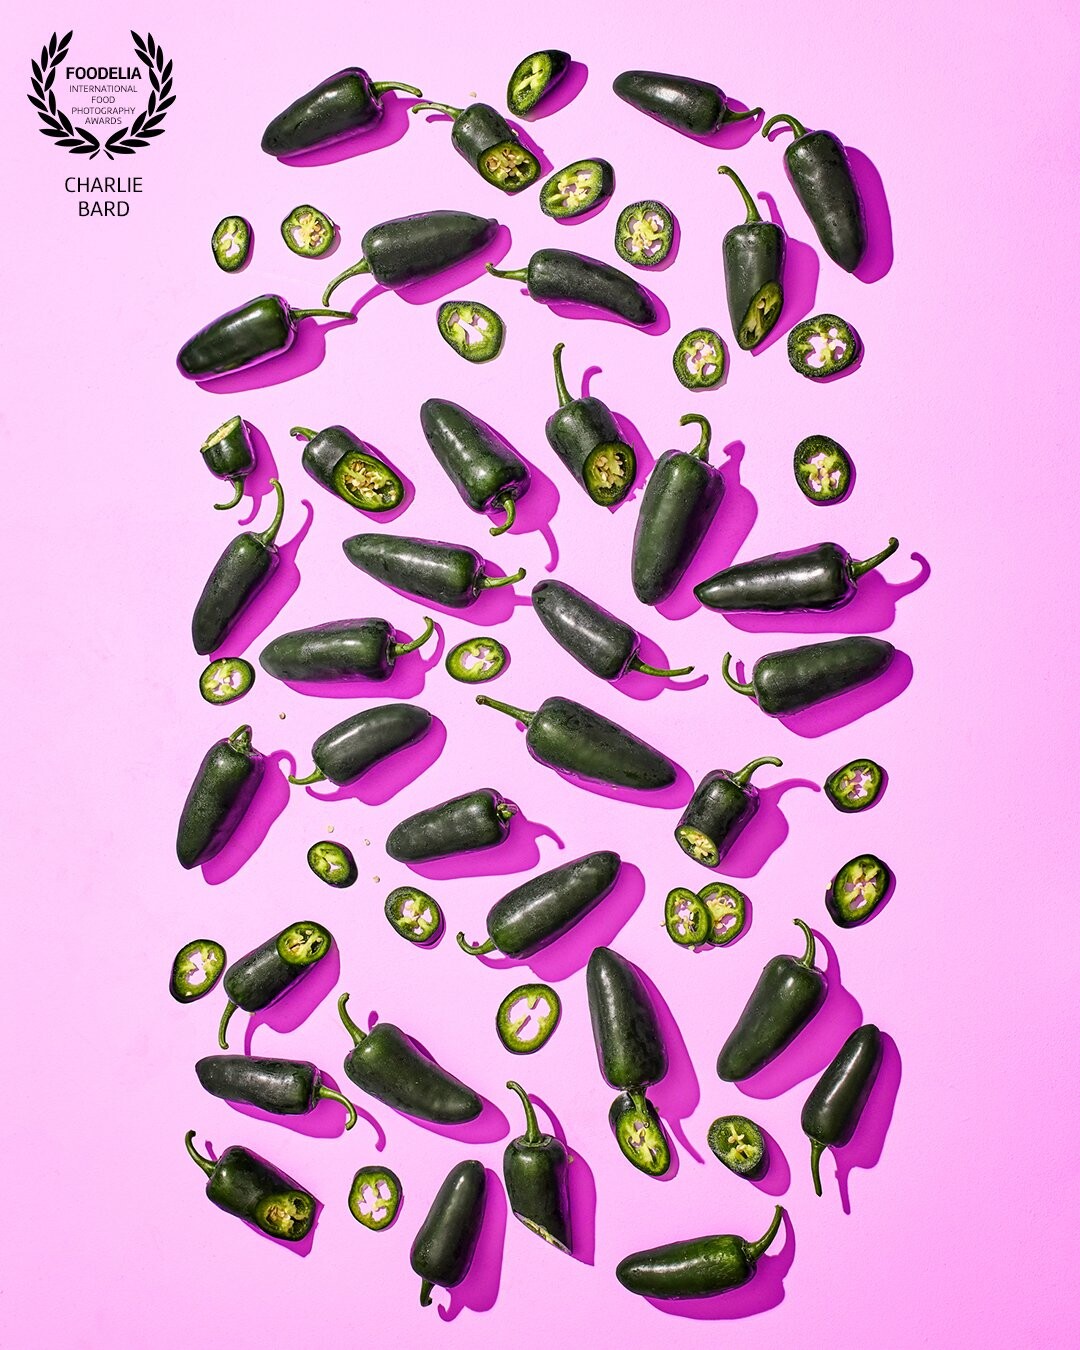 One of a series shot for a new healthy food brand to be used online and in-store printing. This one featuring some fresh jalapeños <br />
Styling from Sophie Foot